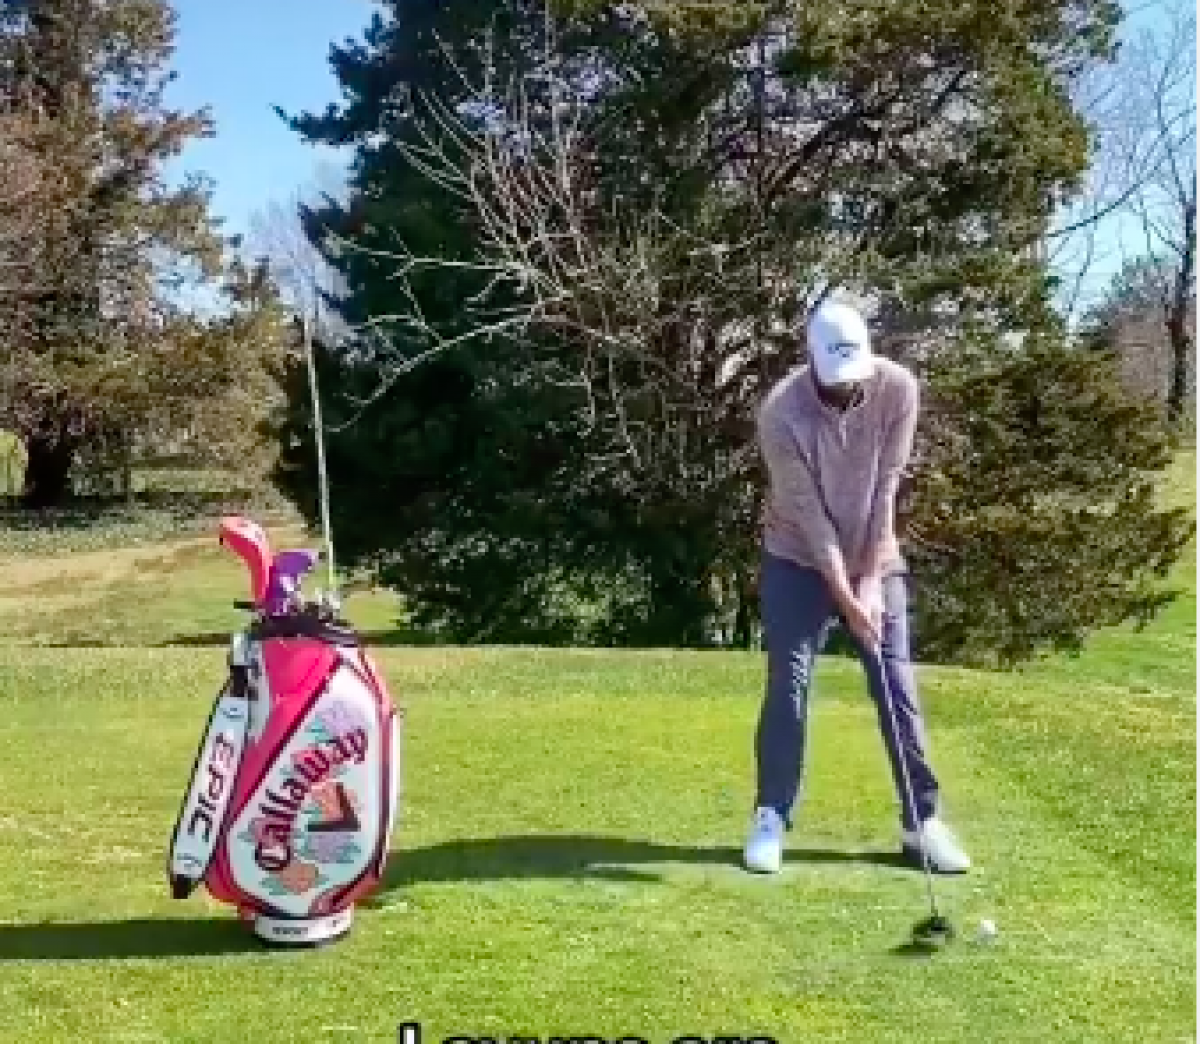 Golf fans react to INCREDIBLE viral video of a golf club flip